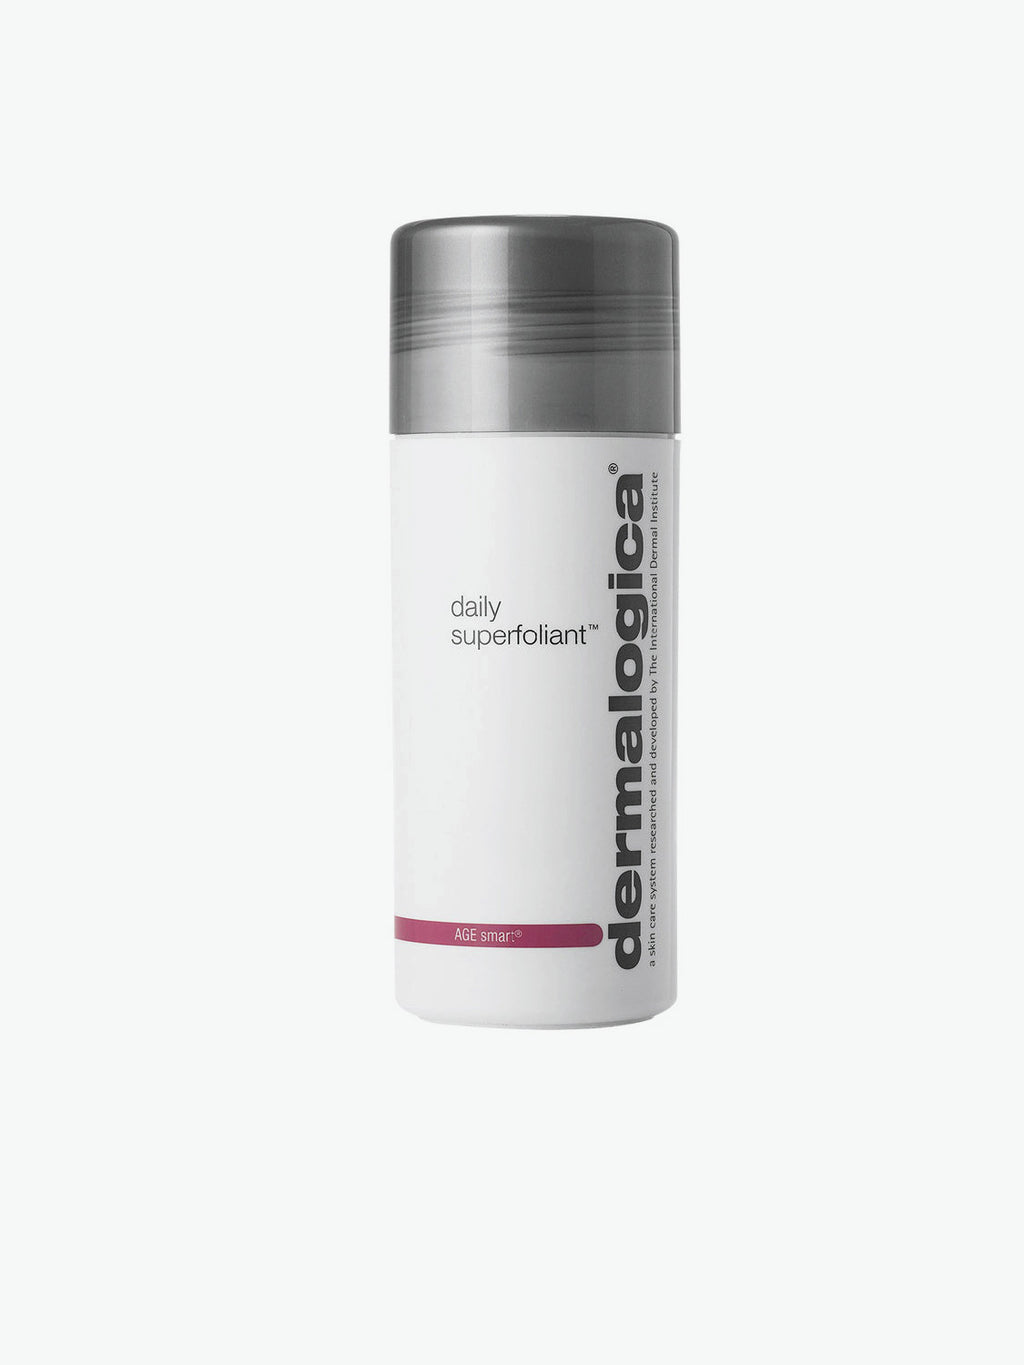 Dermalogica Daily Superfoliant | A